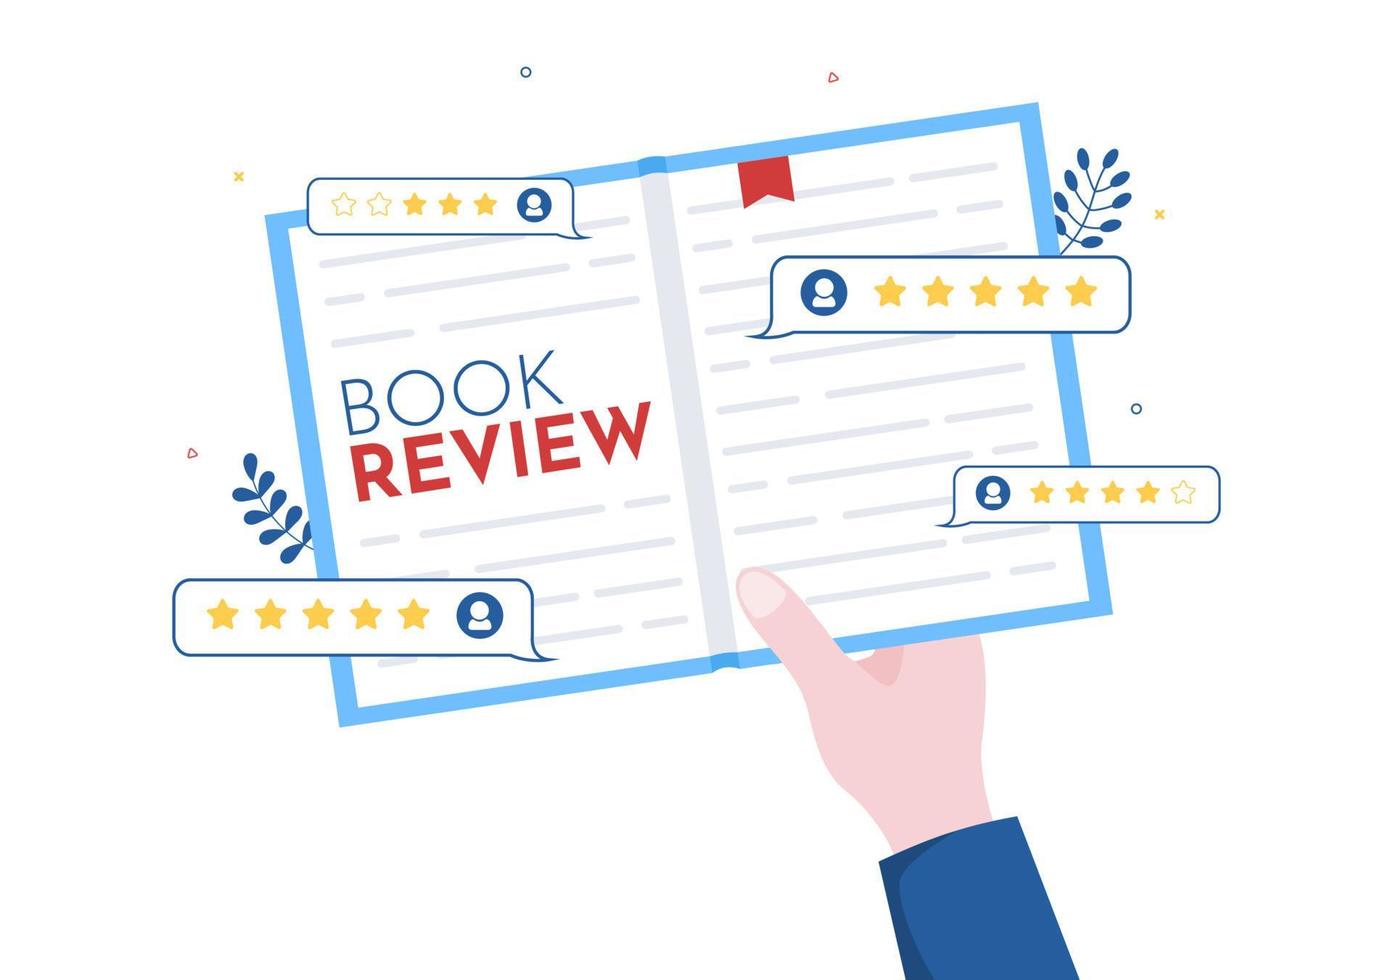 Book Review Template Hand Drawn Cartoon Flat Illustration with Reader Feedback for Analysis, Rating, Satisfaction and Comments About Publications vector